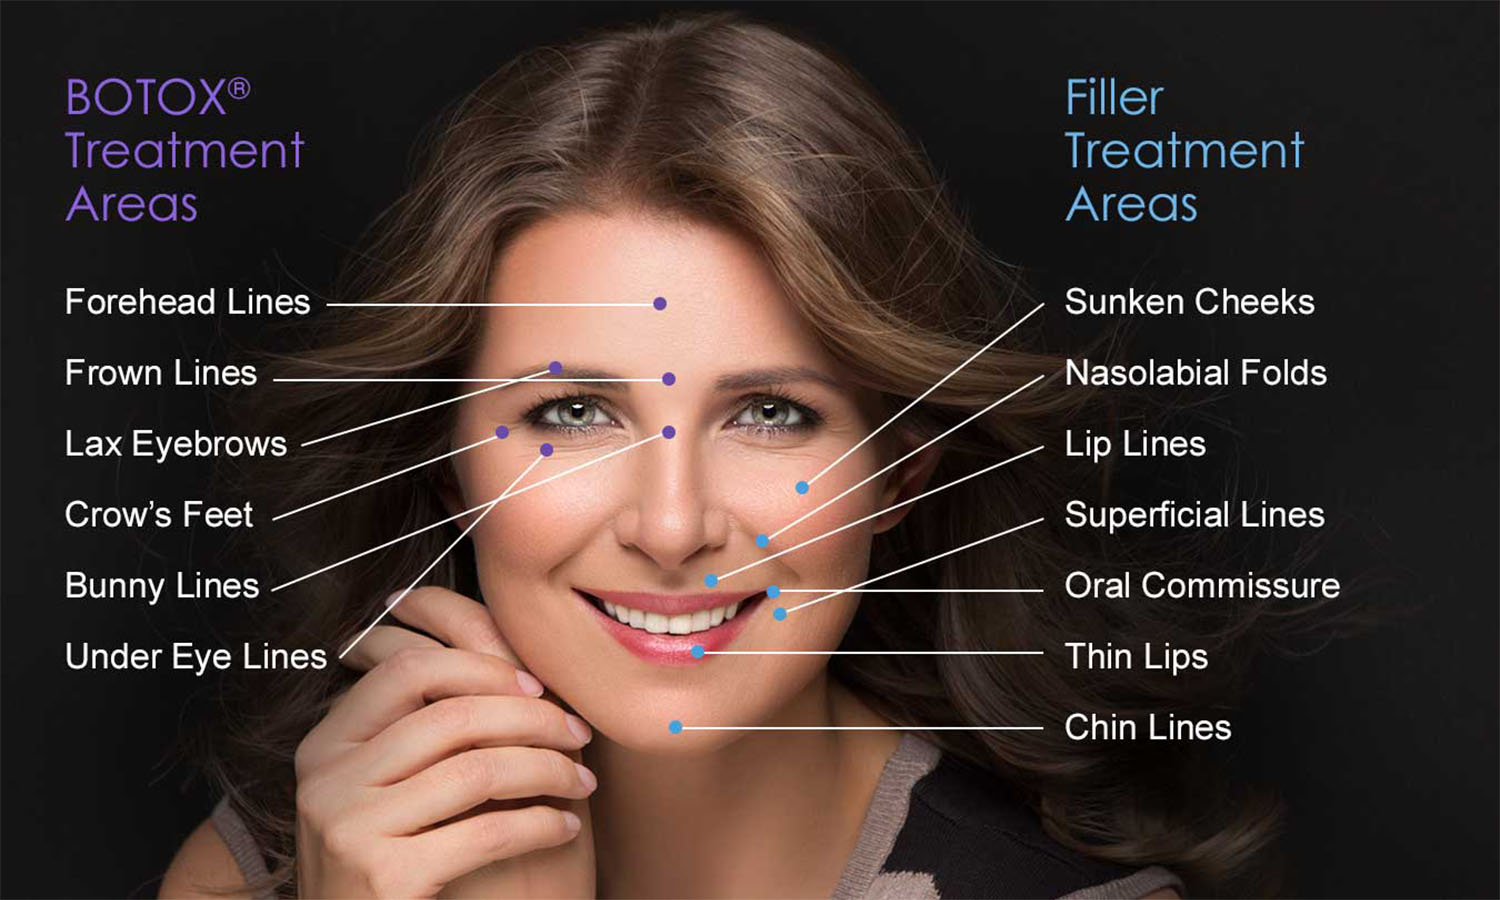 Botox vs. Fillers: Which One Is the Best for You?